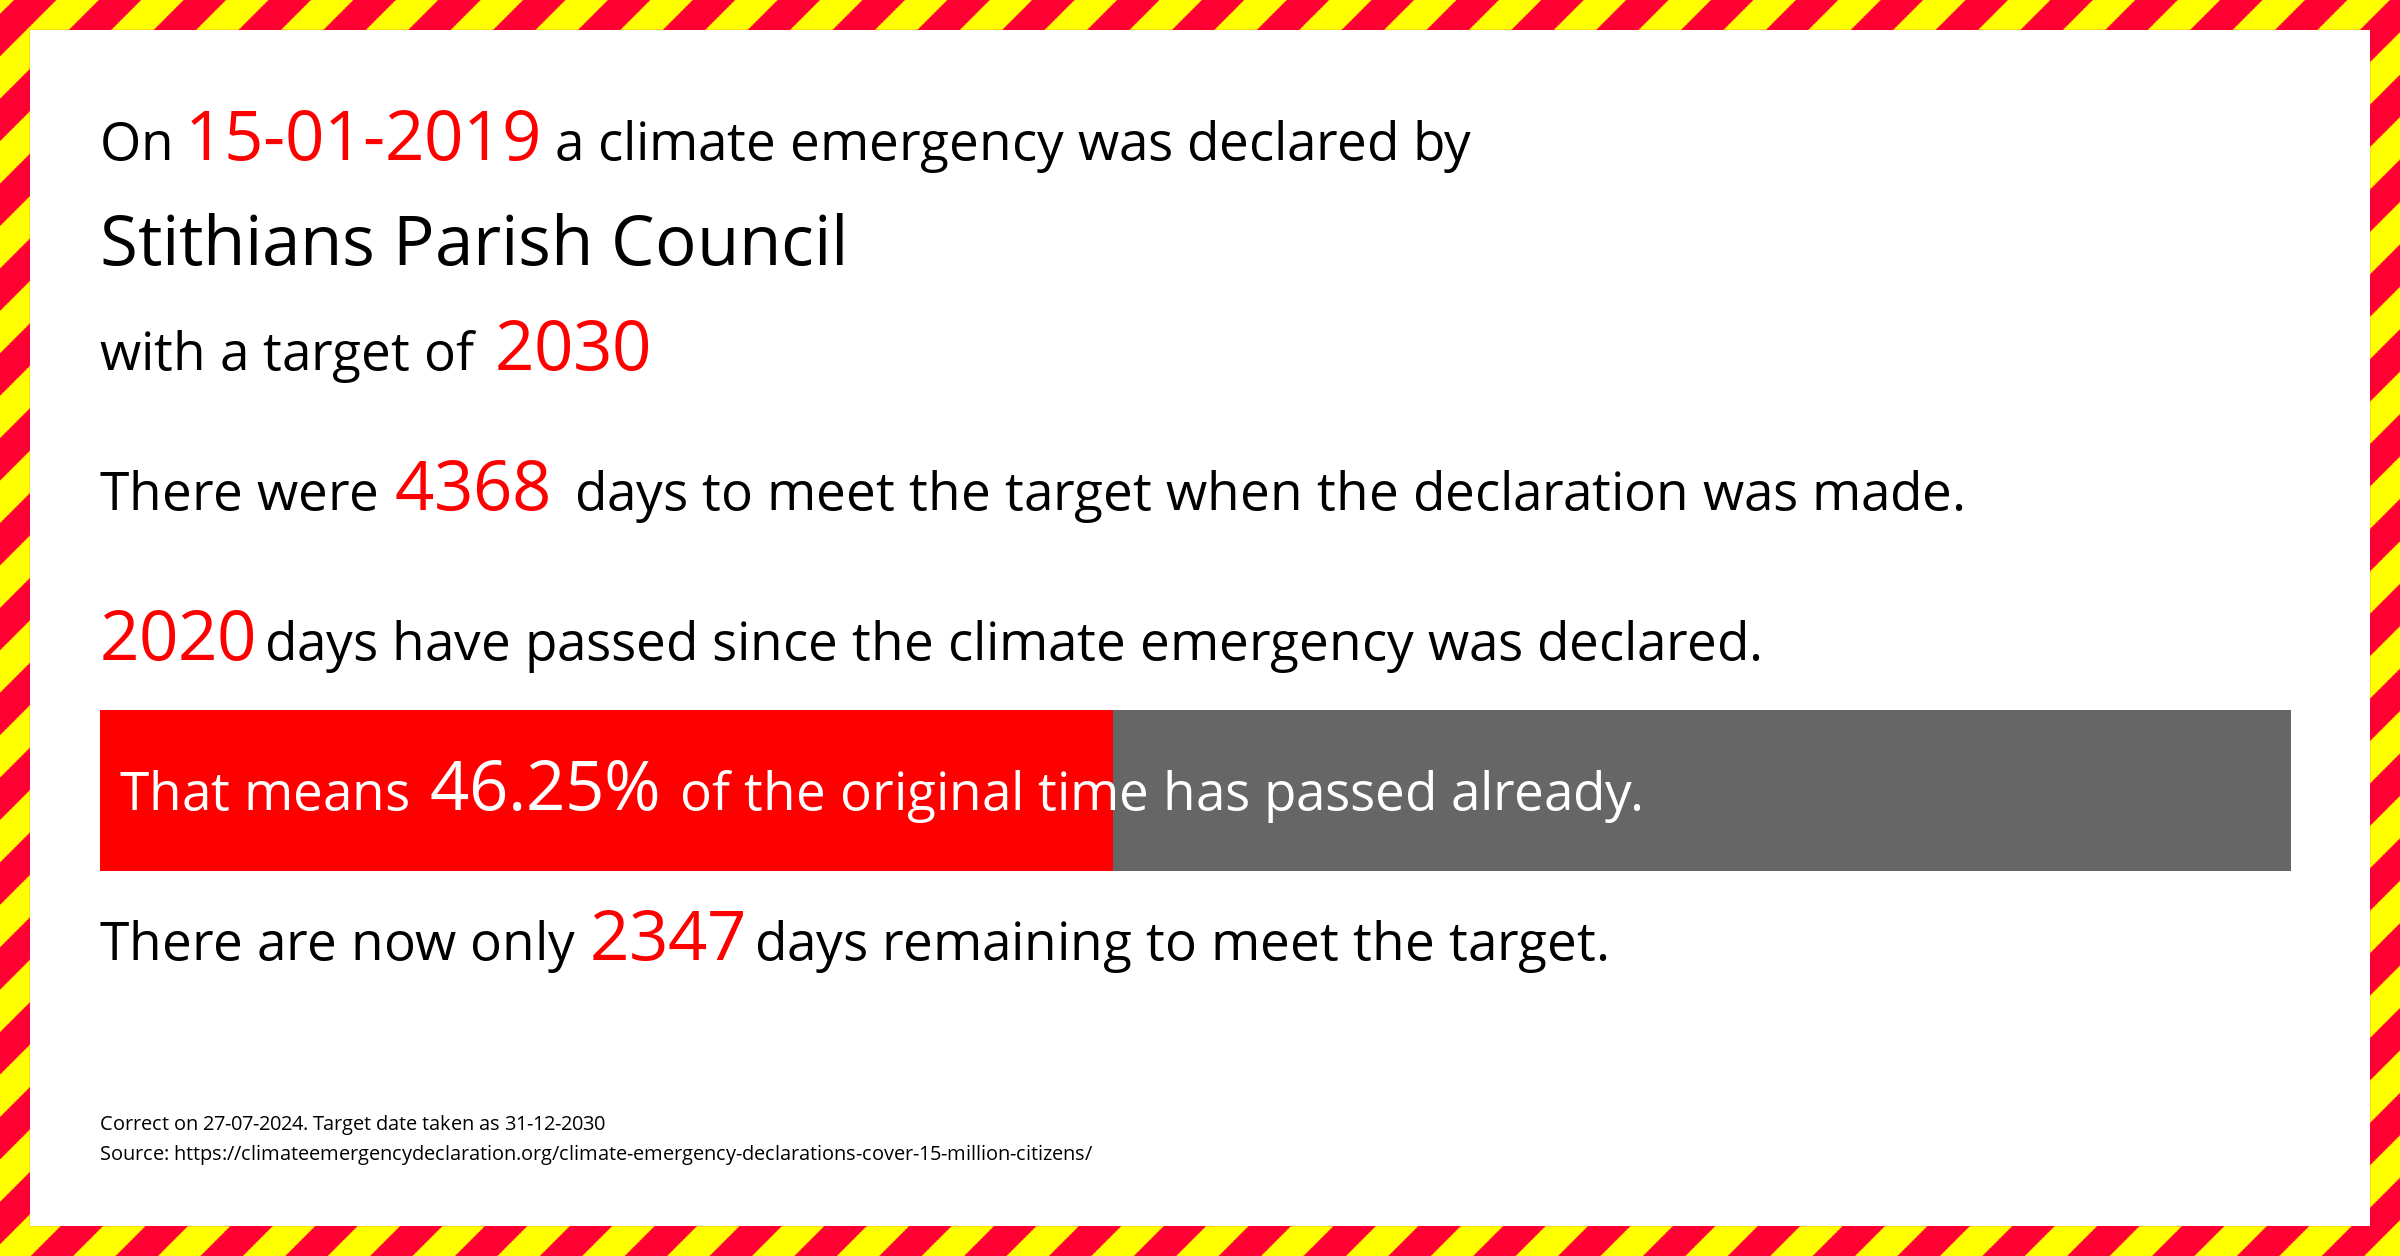 Stithians Parish Council declared a Climate emergency on Tuesday 15th January 2019, with a target of 2030.